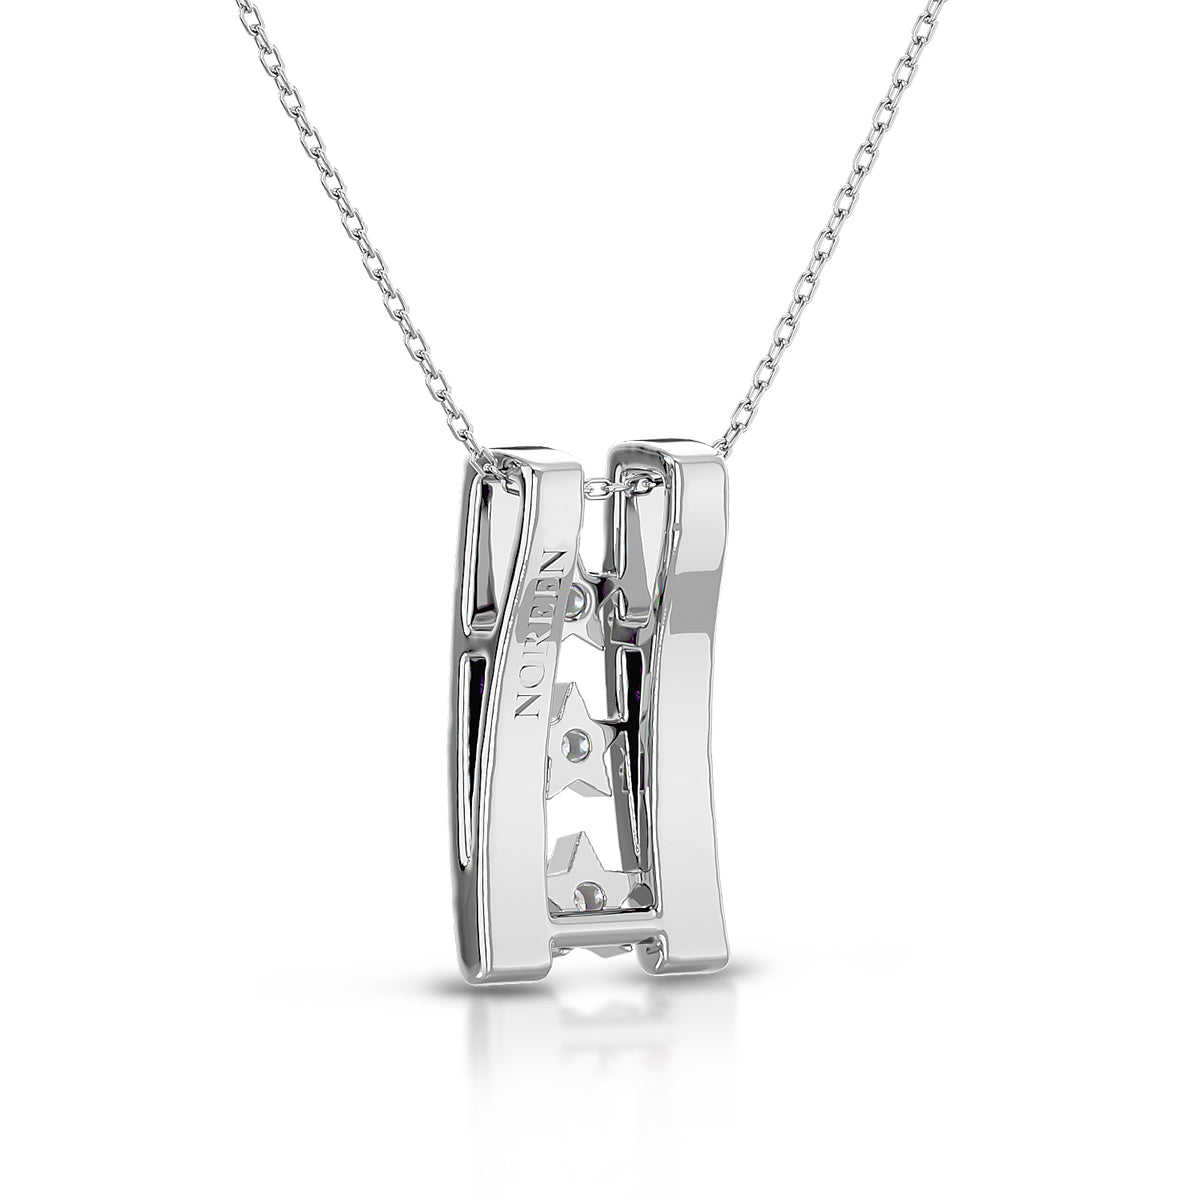 Empowerment Necklace 18K White Gold With Diamonds